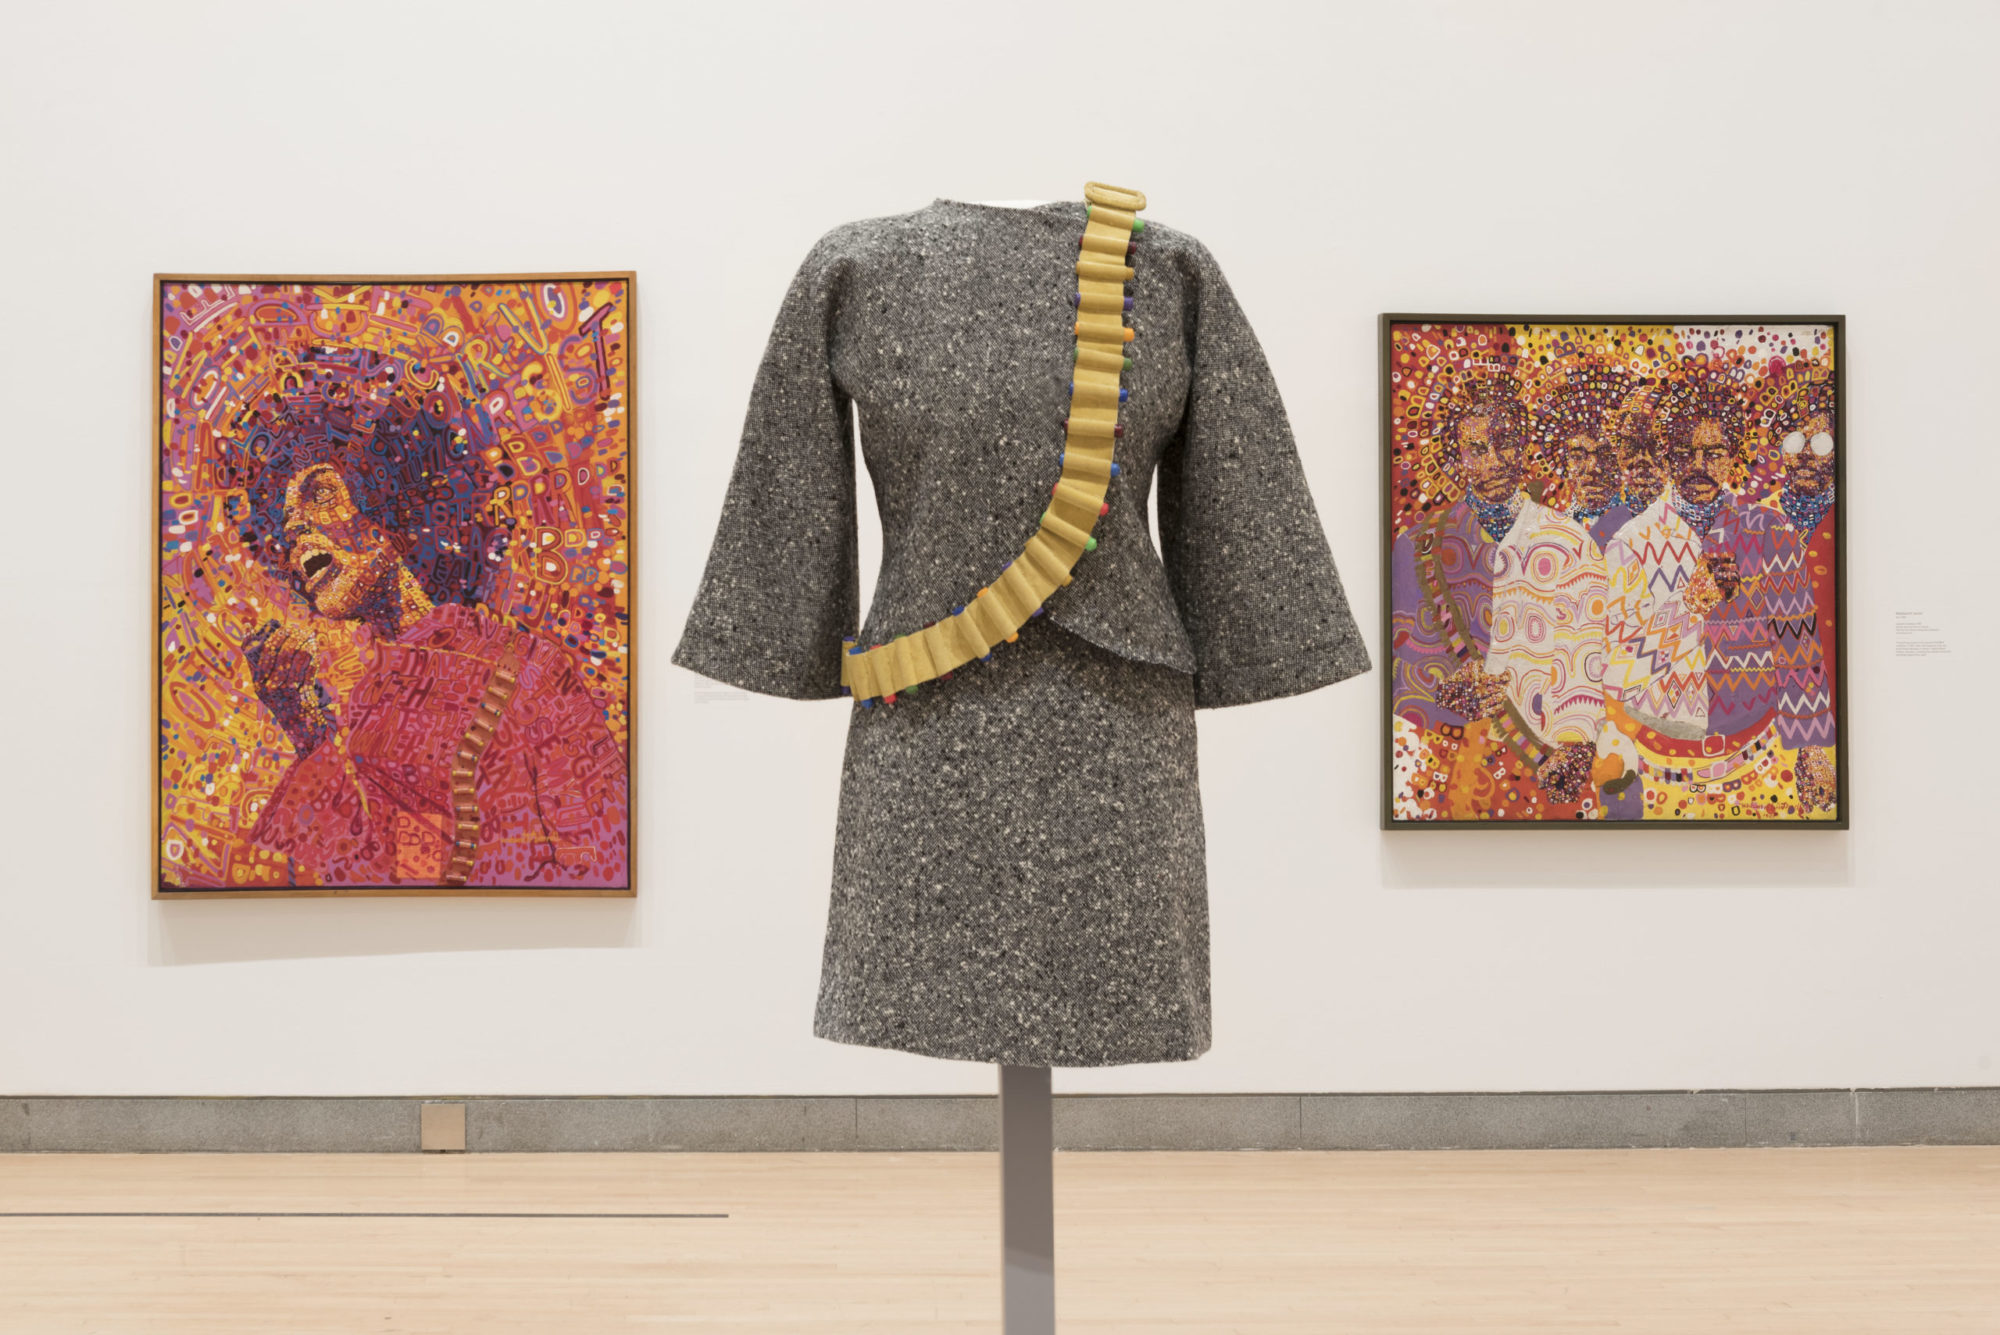 Installation shot of the show 'Soul of a Nation;' a dress with multi-colored bullet belt is center foreground between two colorful paintings depicting African American people